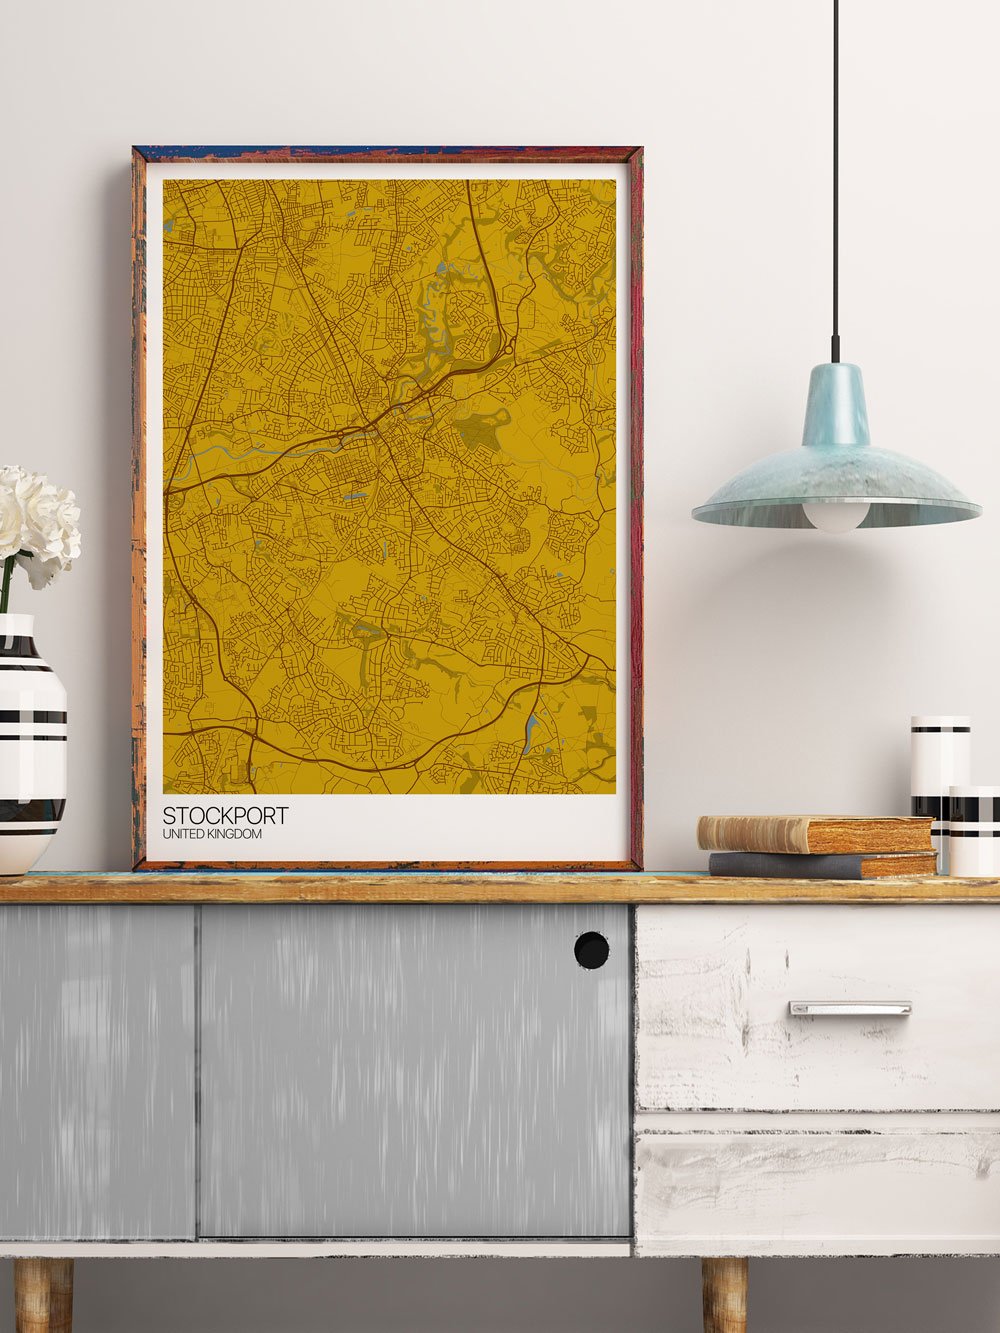 Stockport City Map Wall Art in modern room